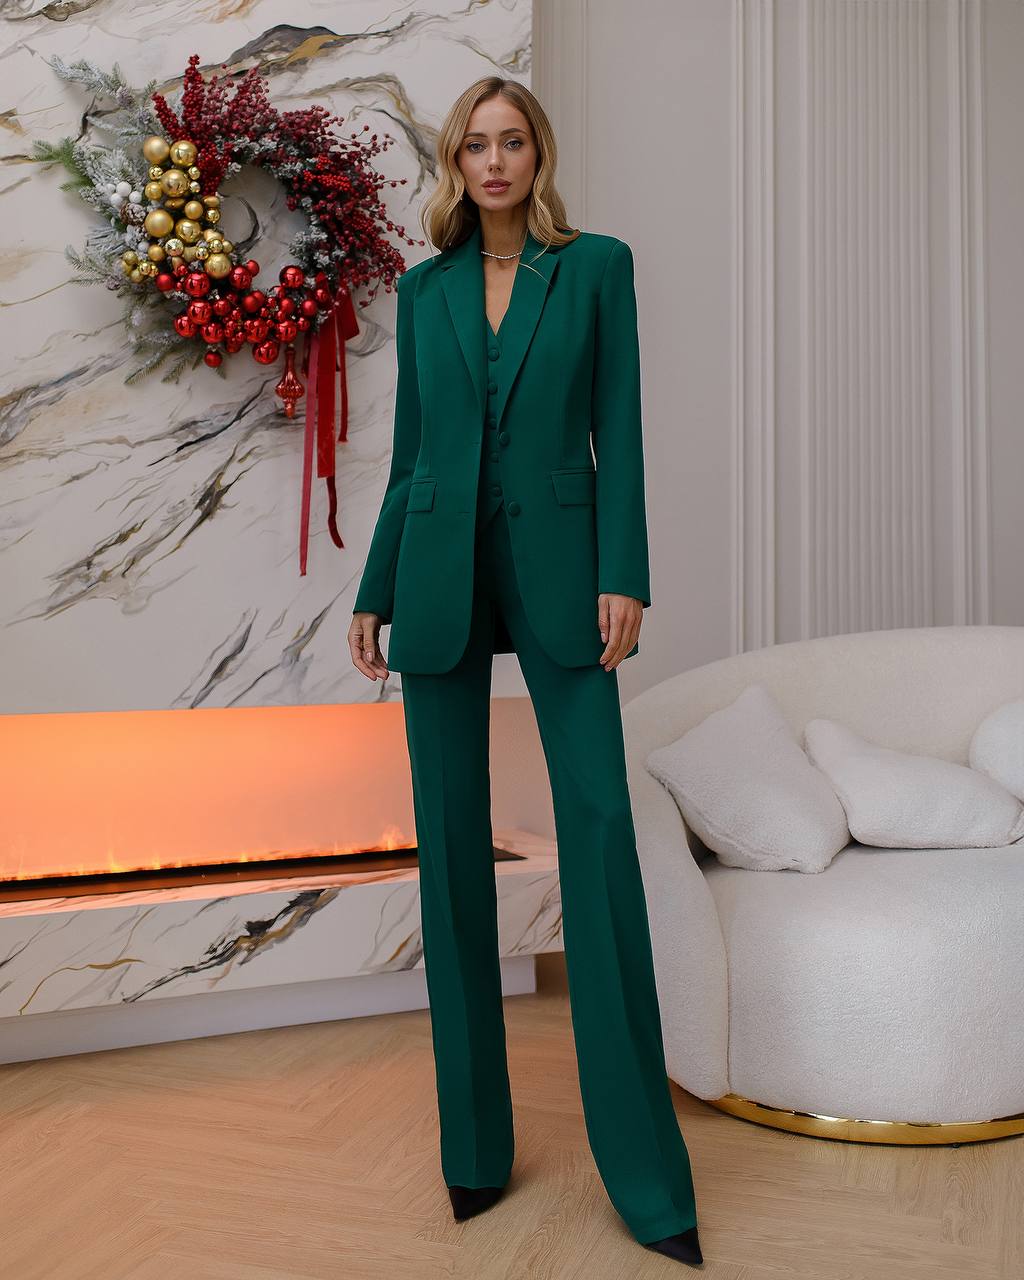 a woman in a green suit standing in a room